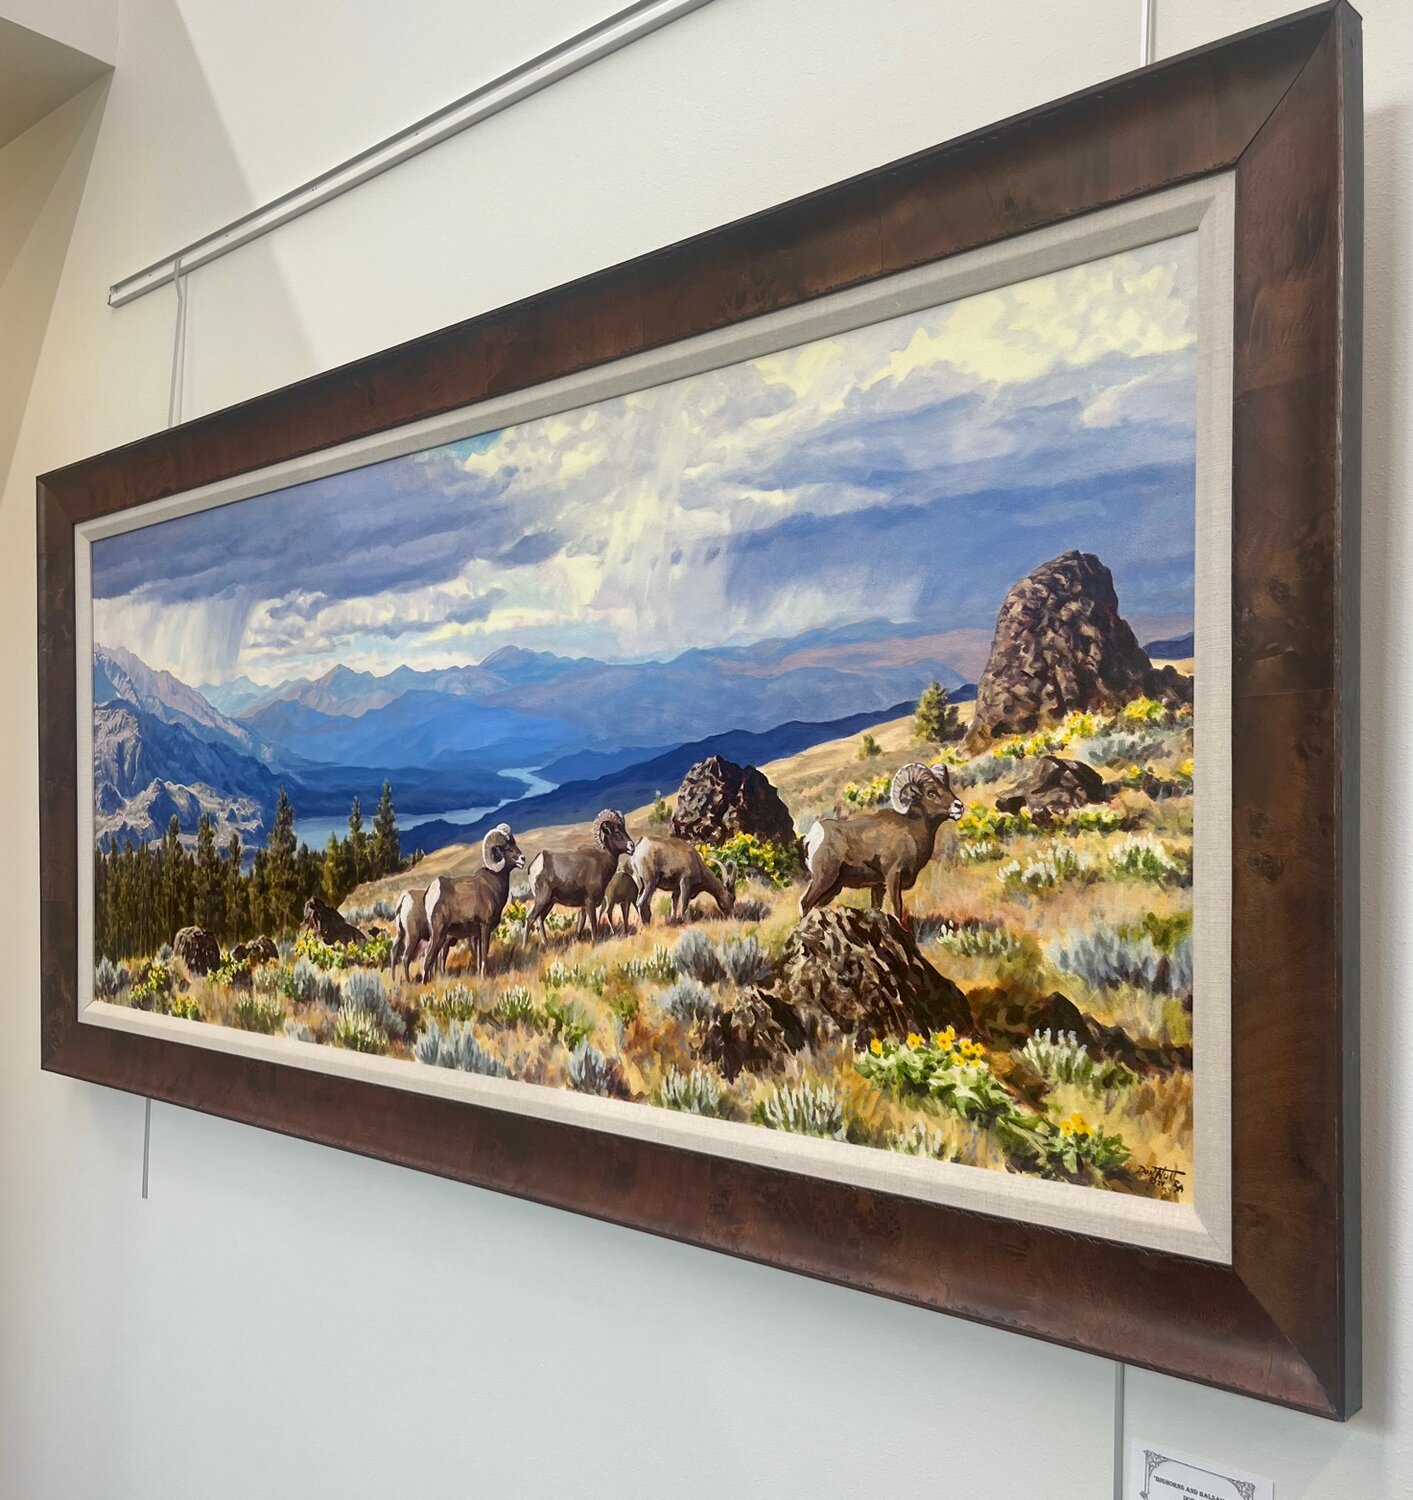 Nature's Window Museum Gallery in Chelan features an upcoming exhibit of Don Nutt's dramatic landscape paintings of eastern Washington, along with taxidermy sculptures from the museum's permanent collection. The exhibit opens on May 31 and runs through June 30 at the Wildlife and Natural History Museum.